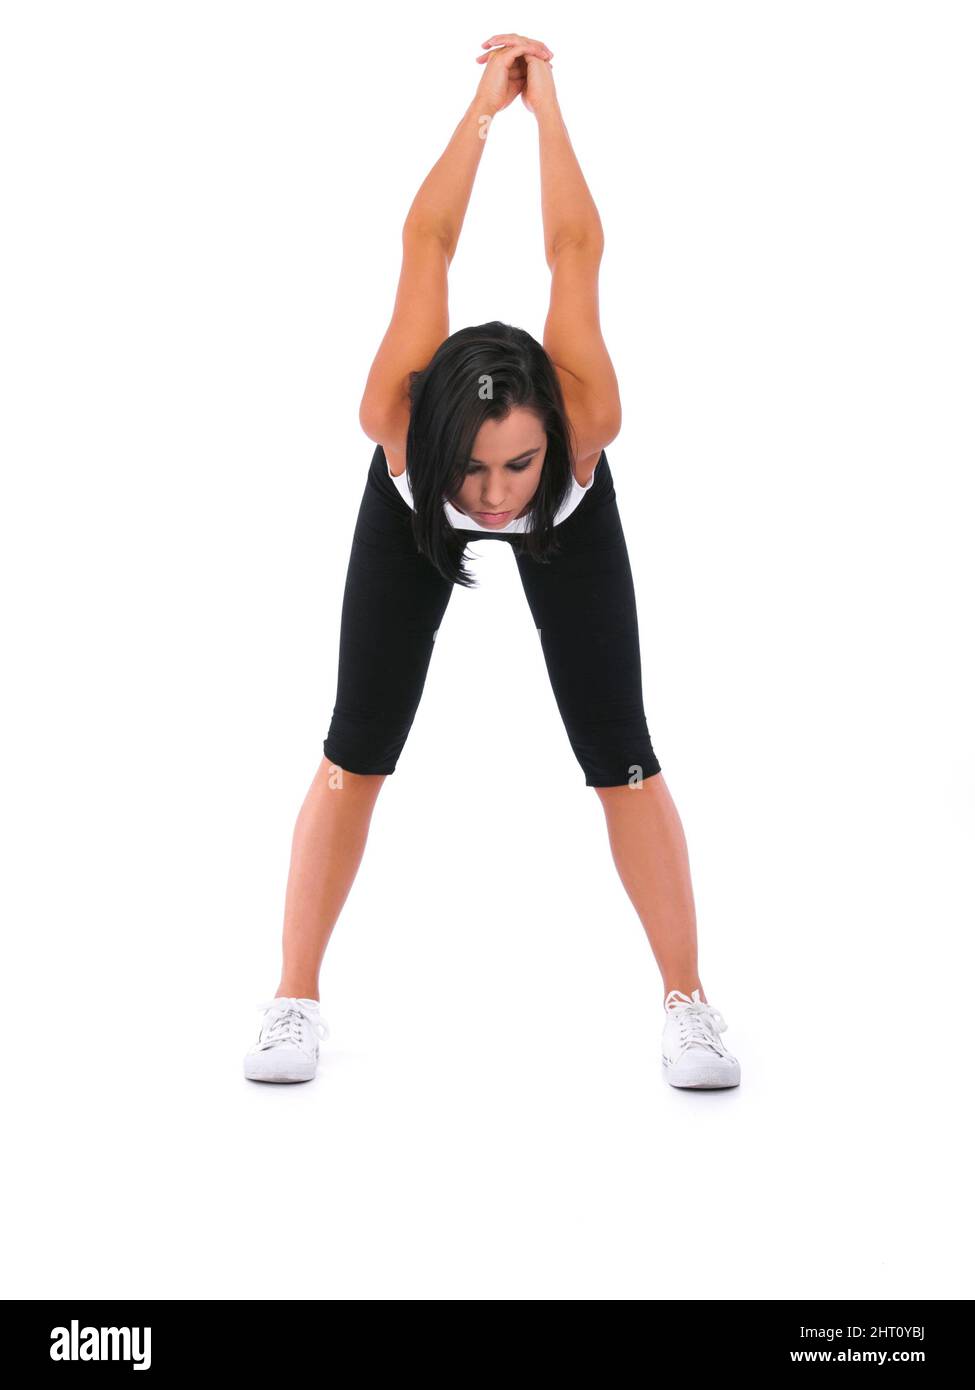 https://c8.alamy.com/comp/2HT0YBJ/stretching-her-arms-to-the-max-a-young-woman-stretching-her-arms-behind-her-back-2HT0YBJ.jpg